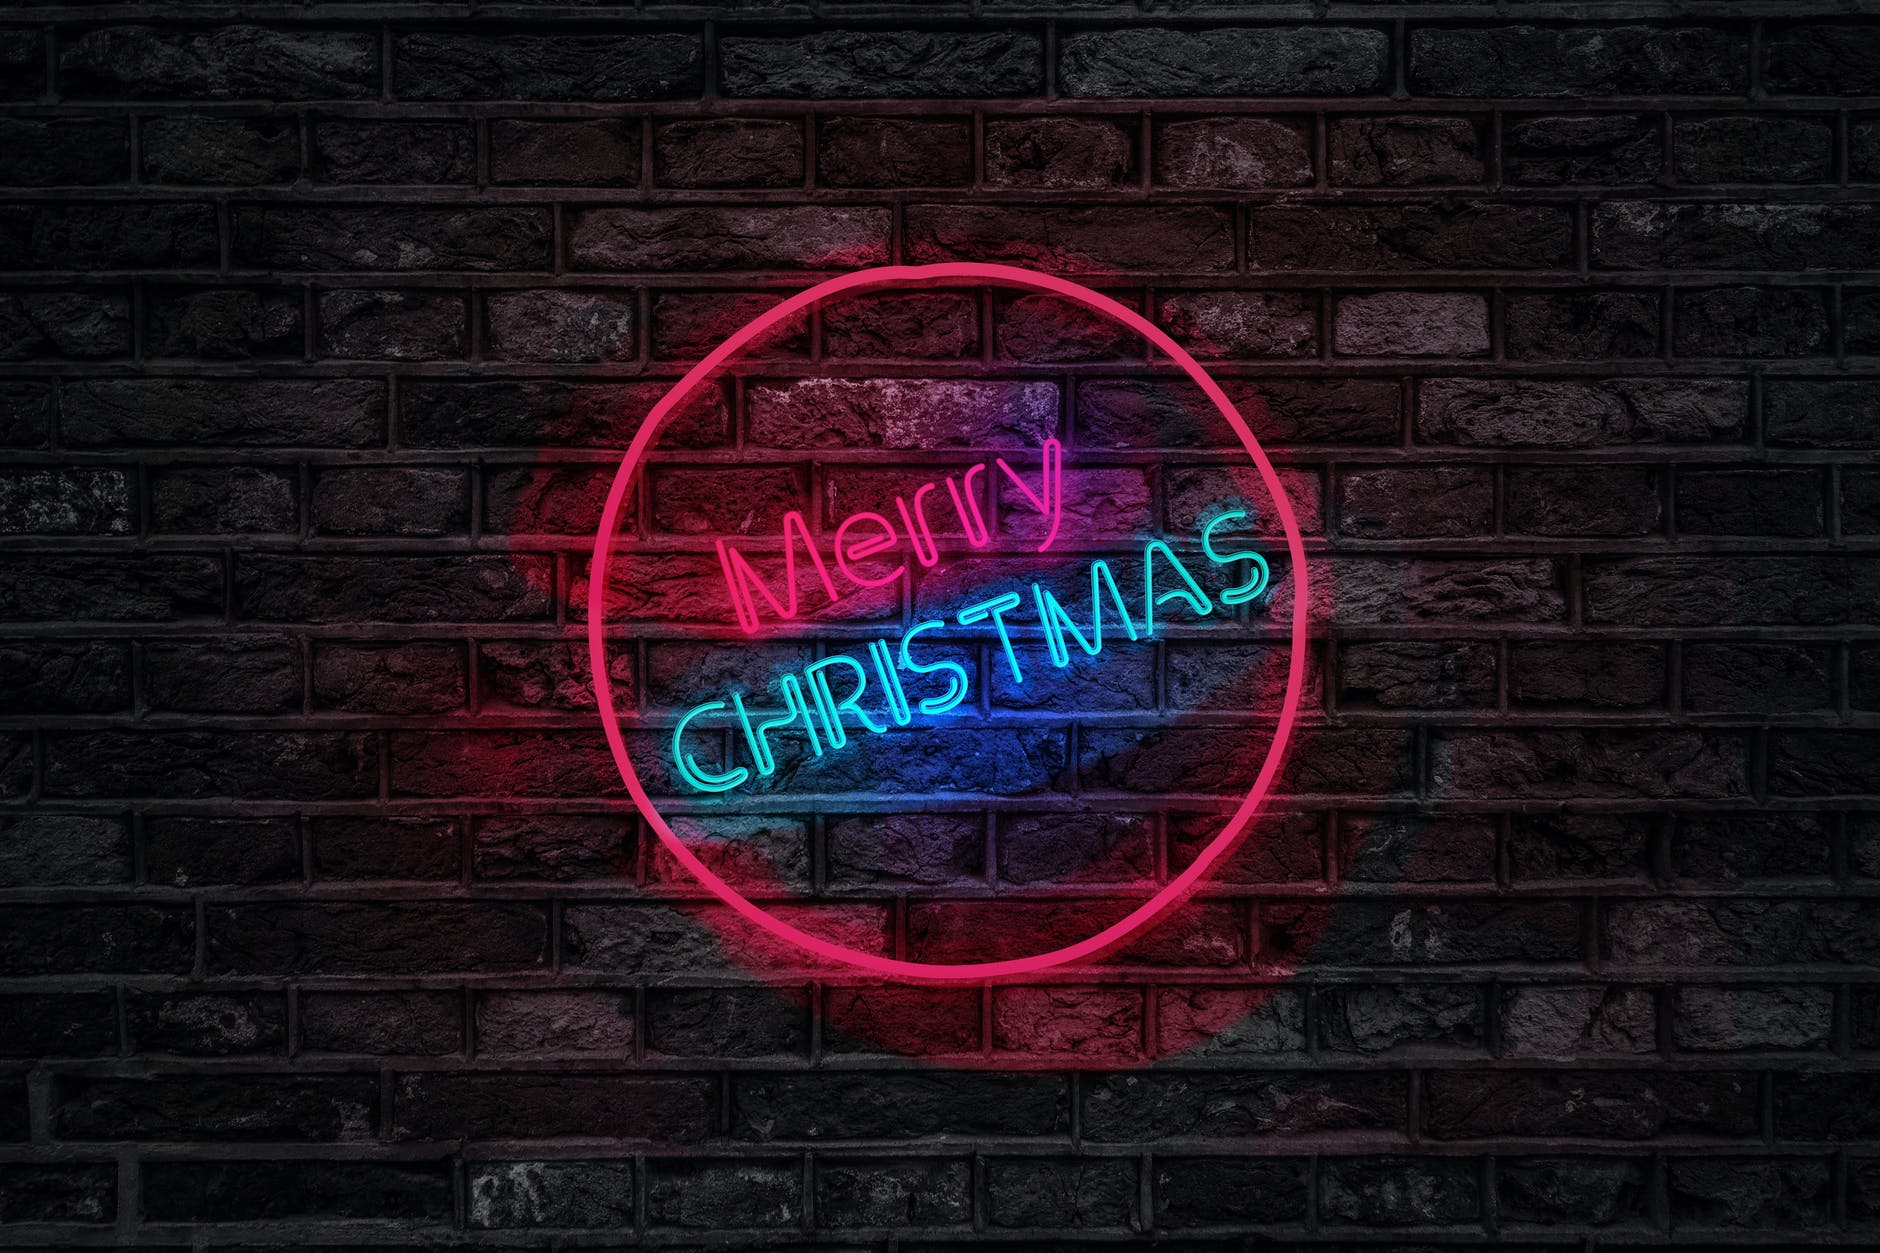 turned on red and blue merry christmas neon sign